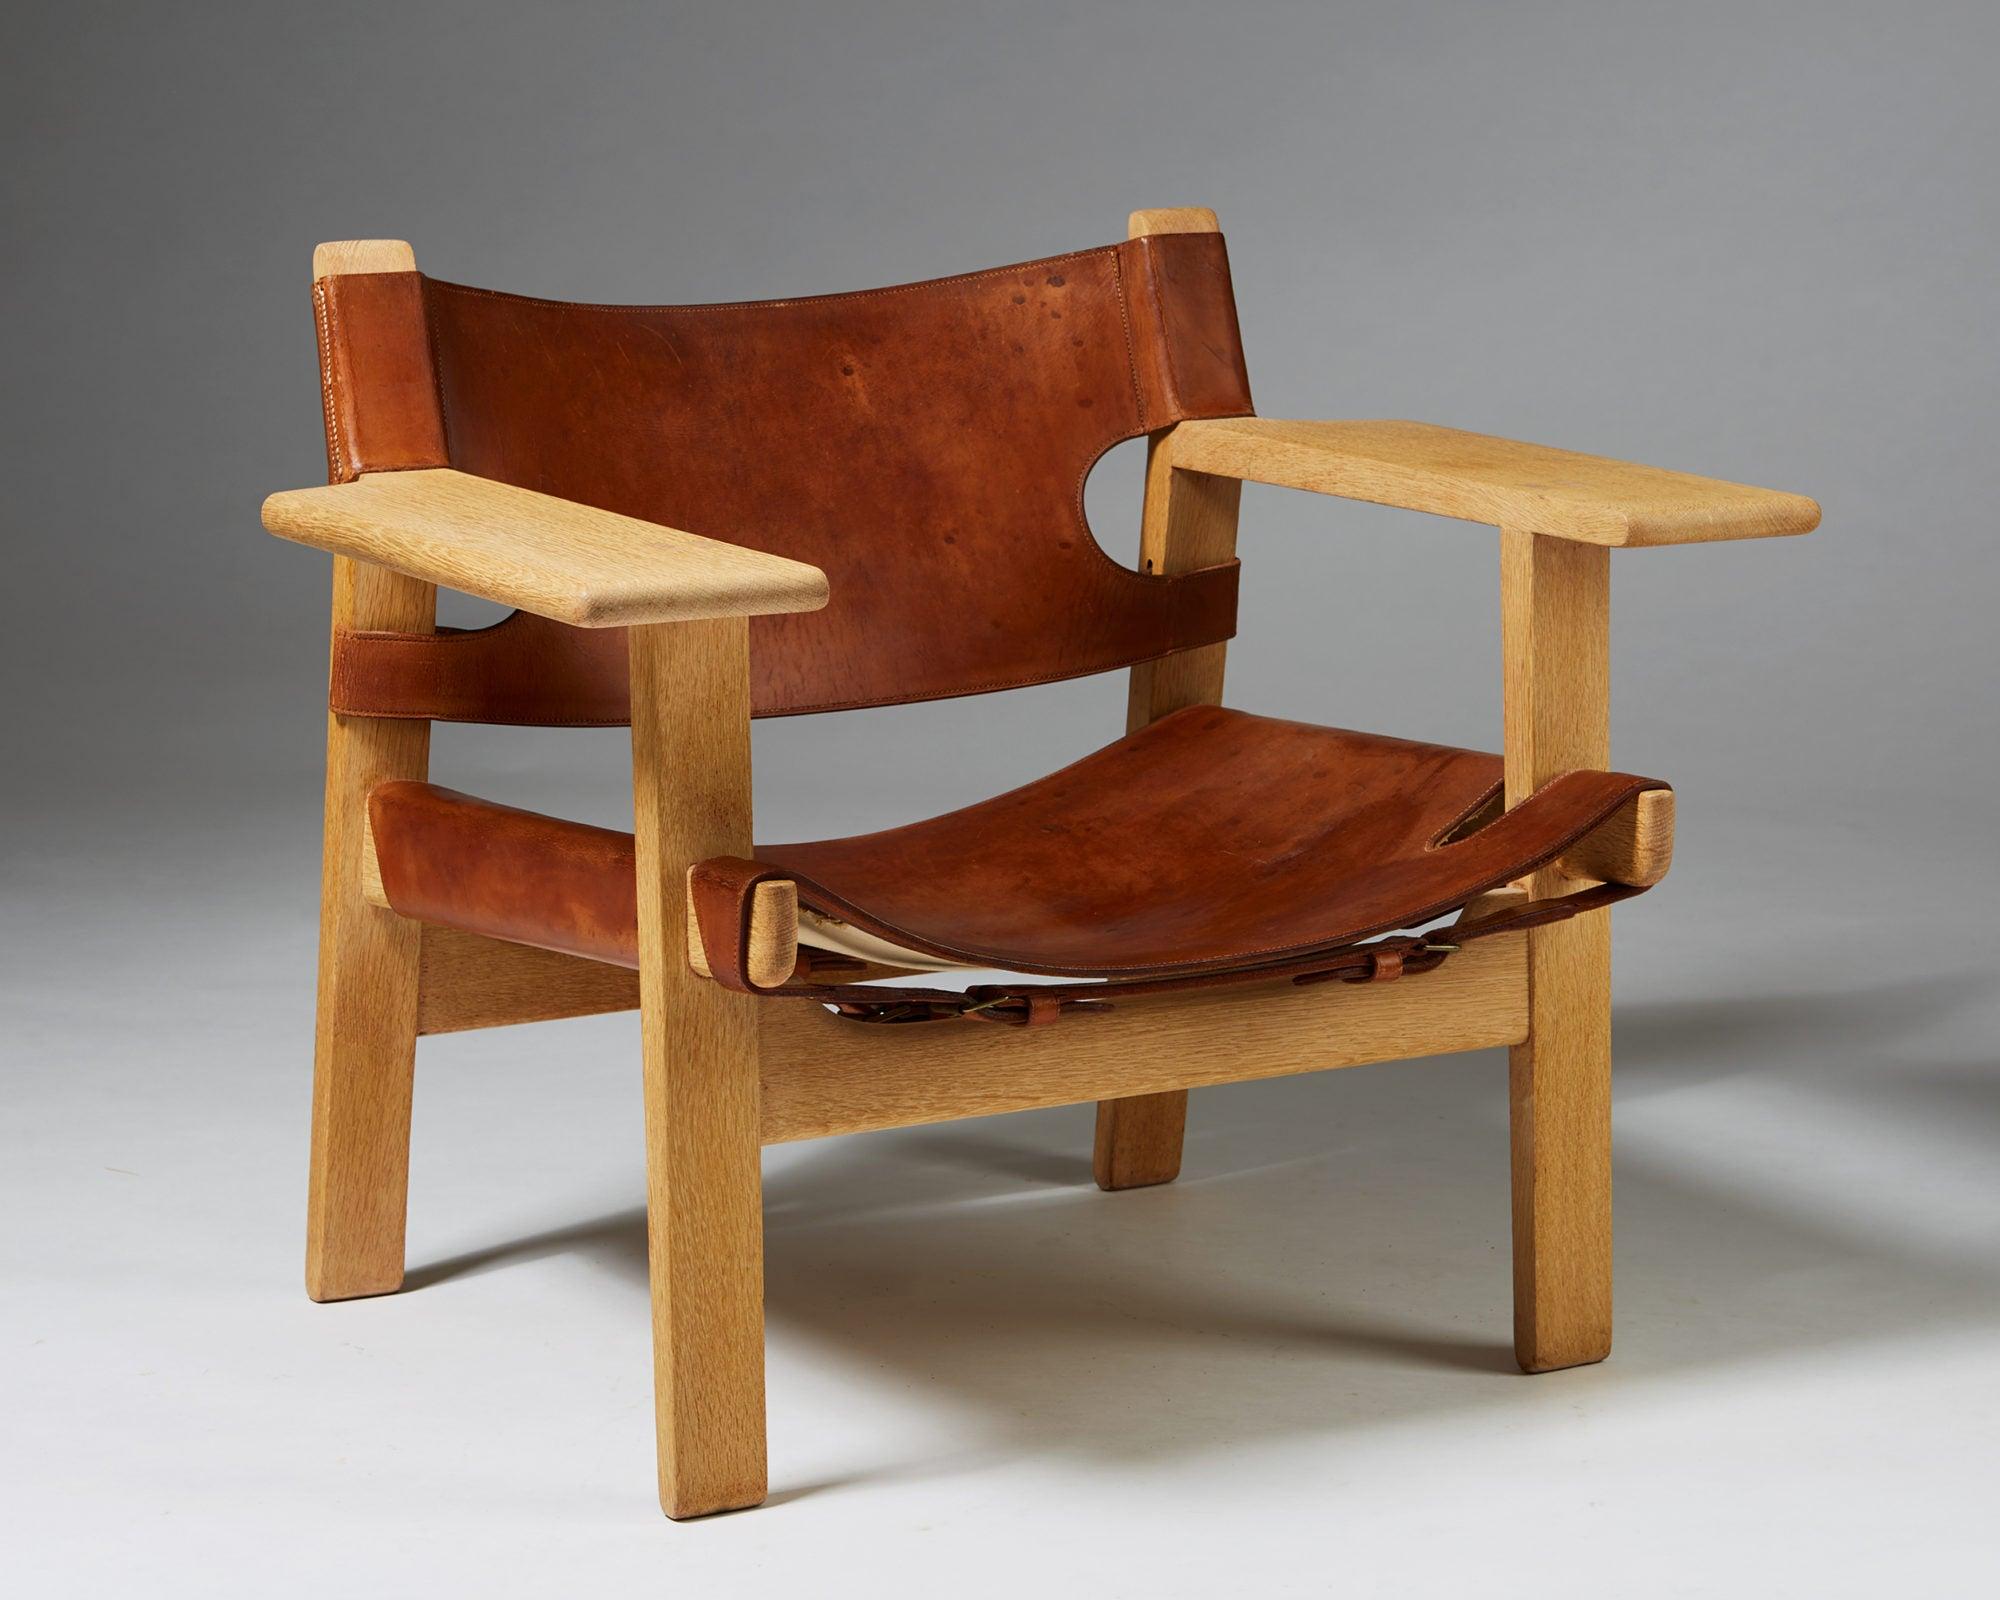 Armchair “Spanish” designed by Børge Mogensen for Erhard Rasmussen, Denmark, 1958.

Oak and leather.

Provenance: This chair is one of the three designed for the Copenhagen cabinet Maker's Guild Exhibition of 1958.

Literature: Dansk Møbelkunst